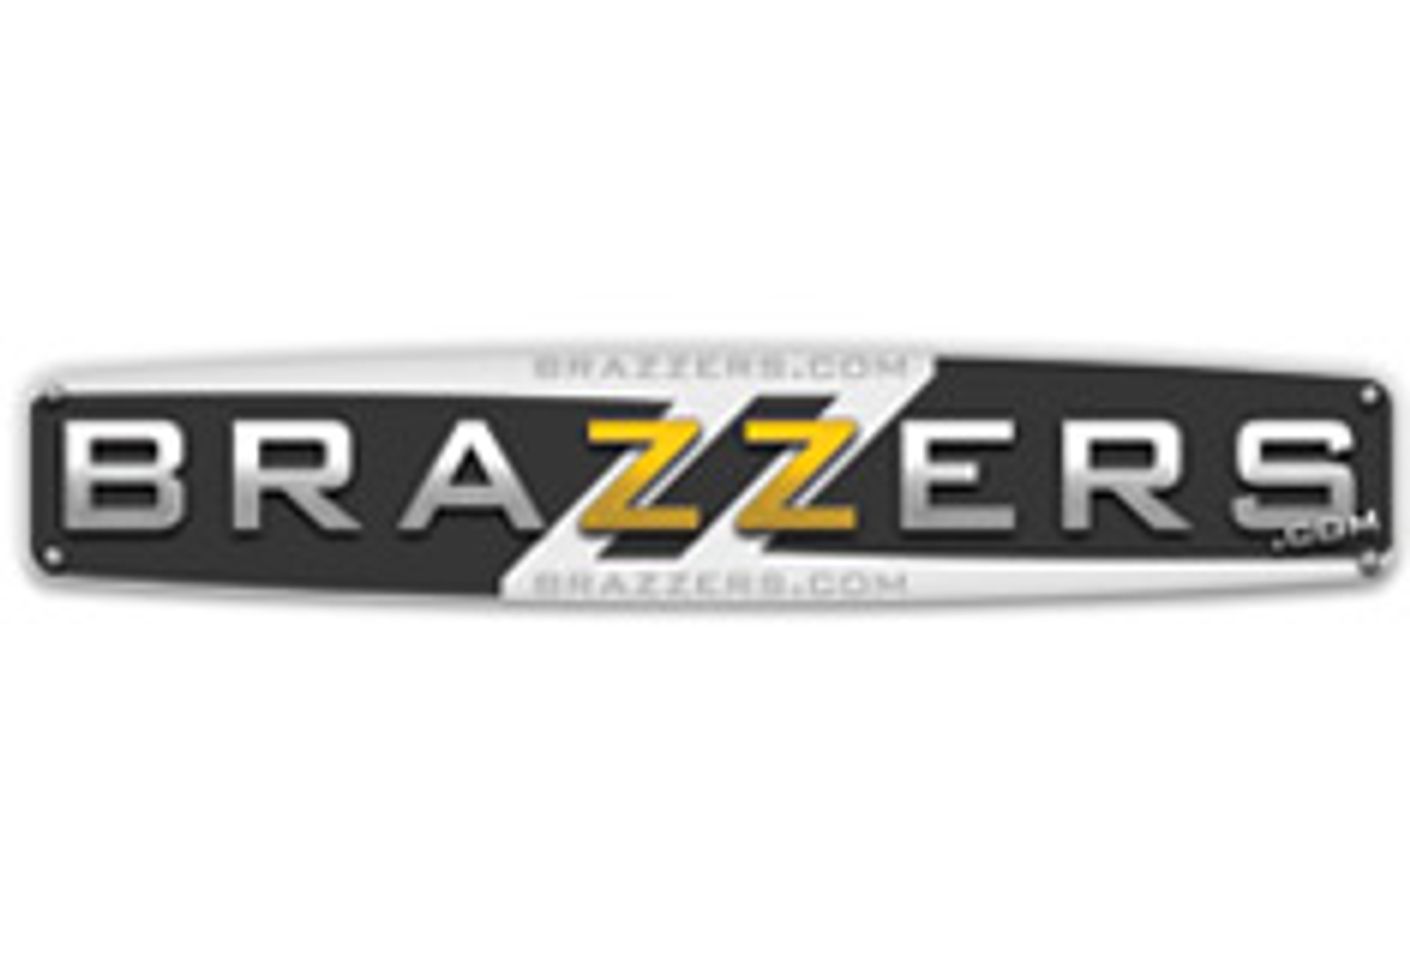 Brazzers, ATM LA Looking for New Talent in Florida